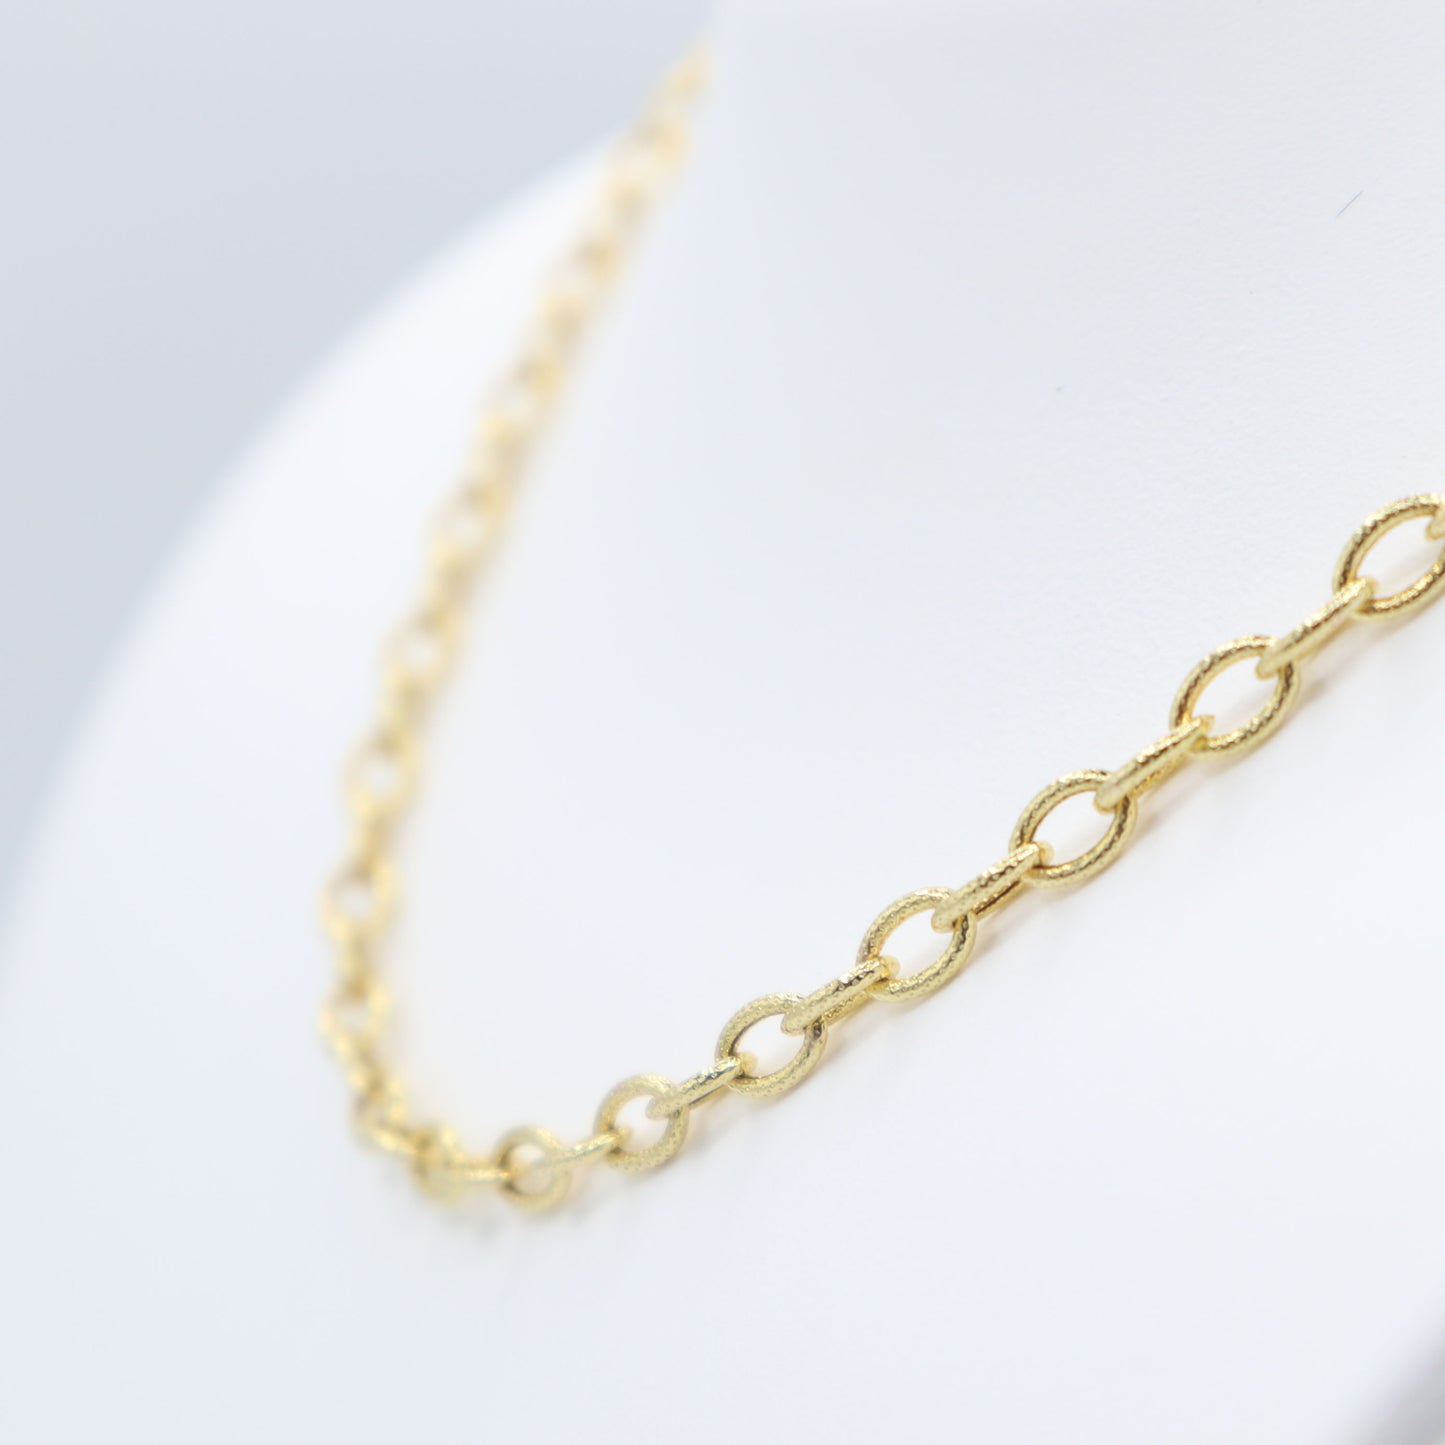 Gold Textured Cable Chain 18"